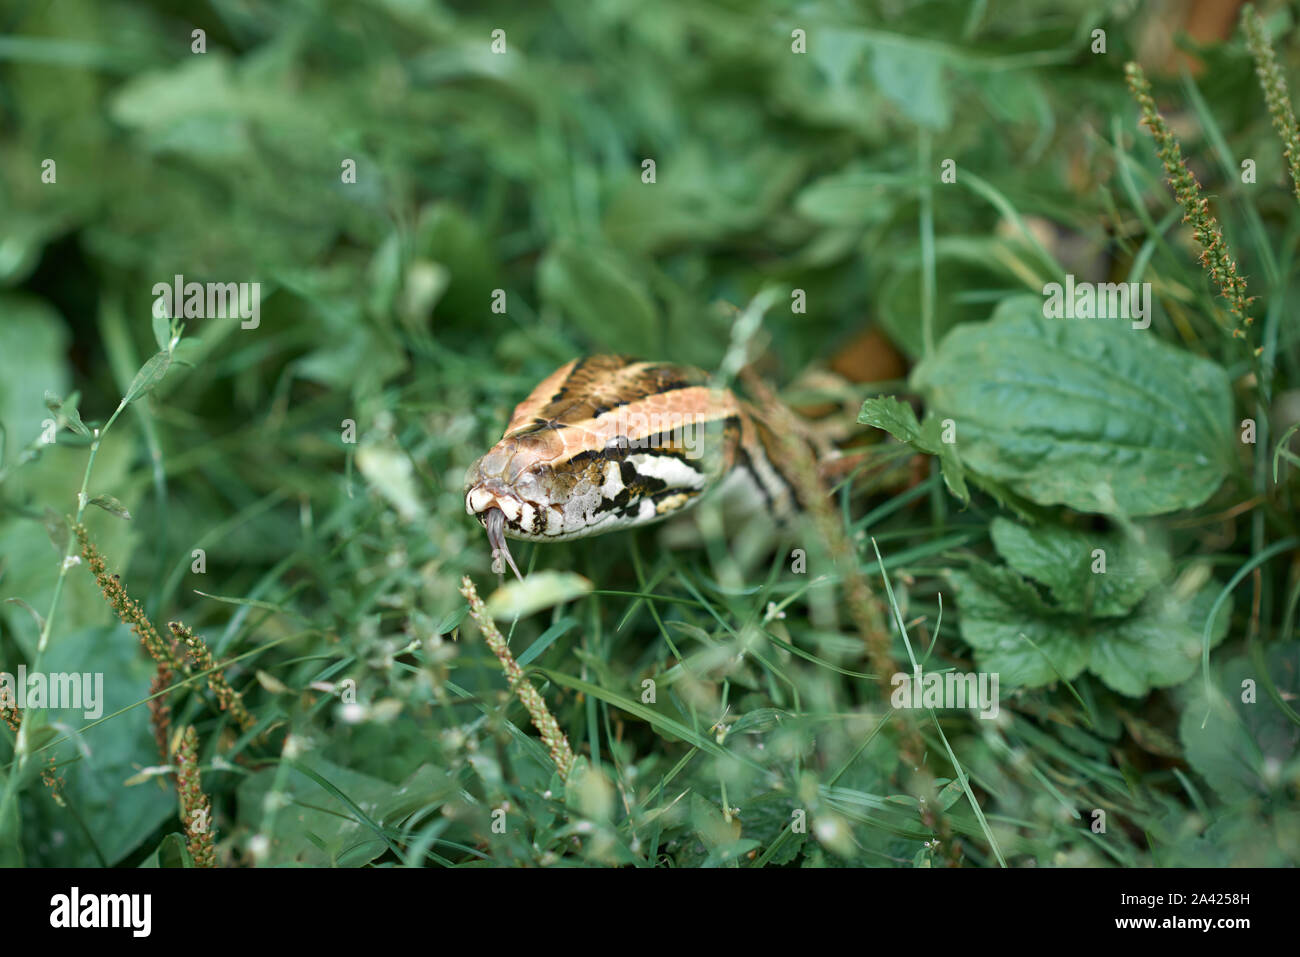 Scary snake showing forked tongue. Dangerous serpent, phyton creeping and lying in grass of garden. Stock Photo